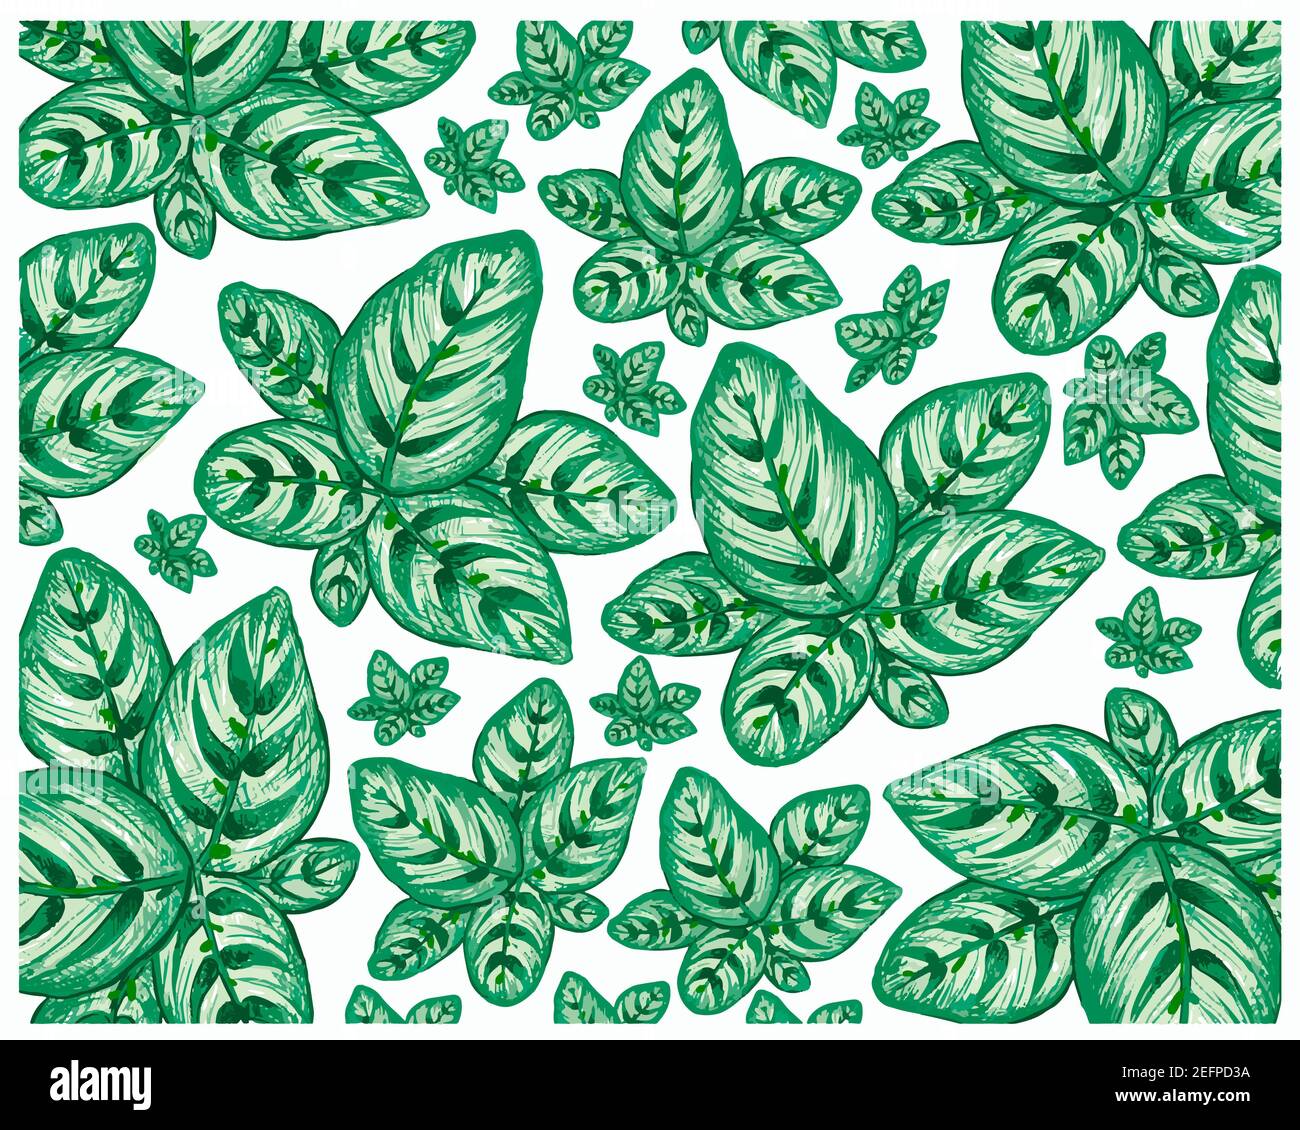 Illustration Background of Beautiful Calathea Makoyana, Cathedral Windows or Peacock Plant for Garden Decoration Stock Photo